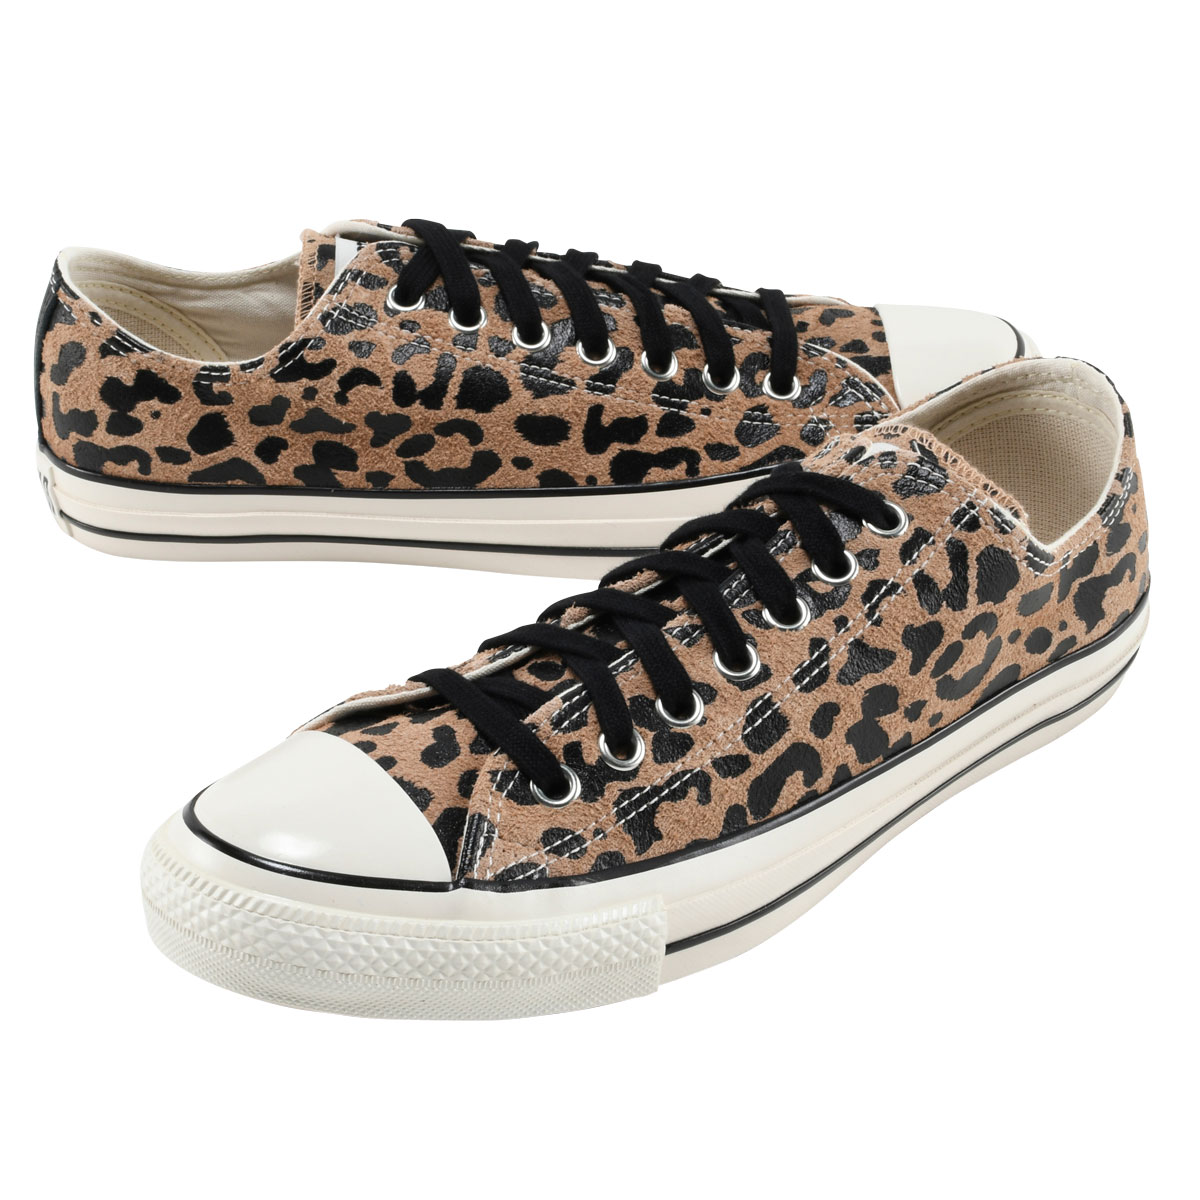 【CONVERSE】 SUEDE ALL STAR US LEOPARD OX (Leopard)